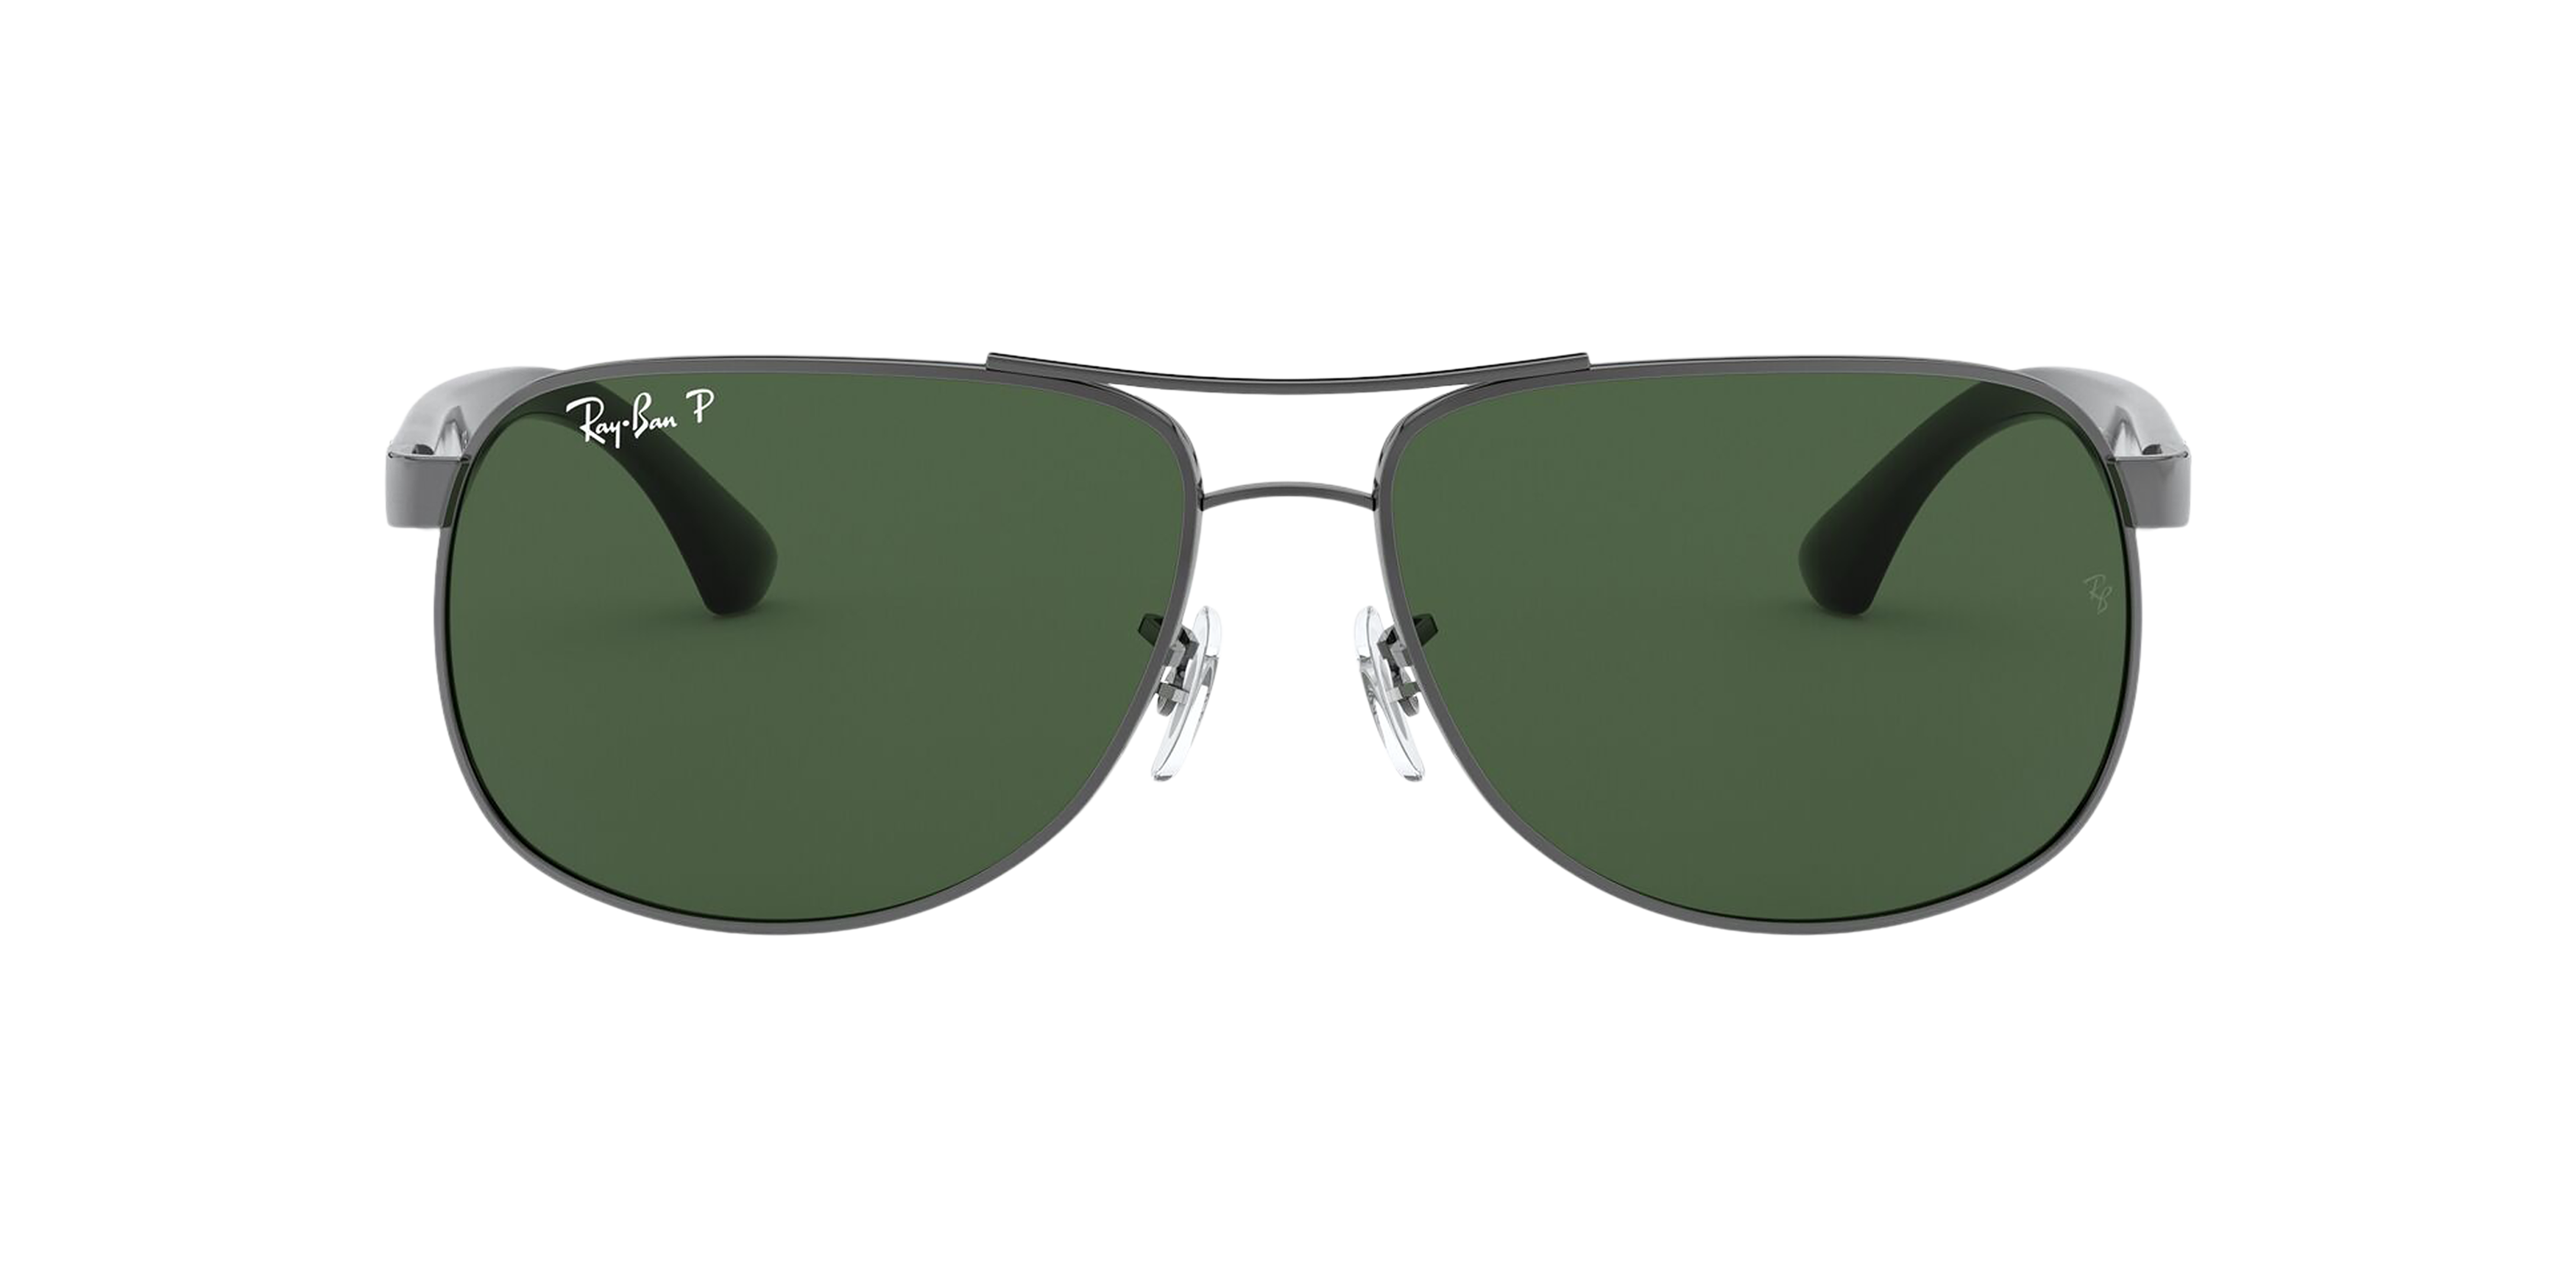 [products.image.front] Ray-Ban RB3502 004/58